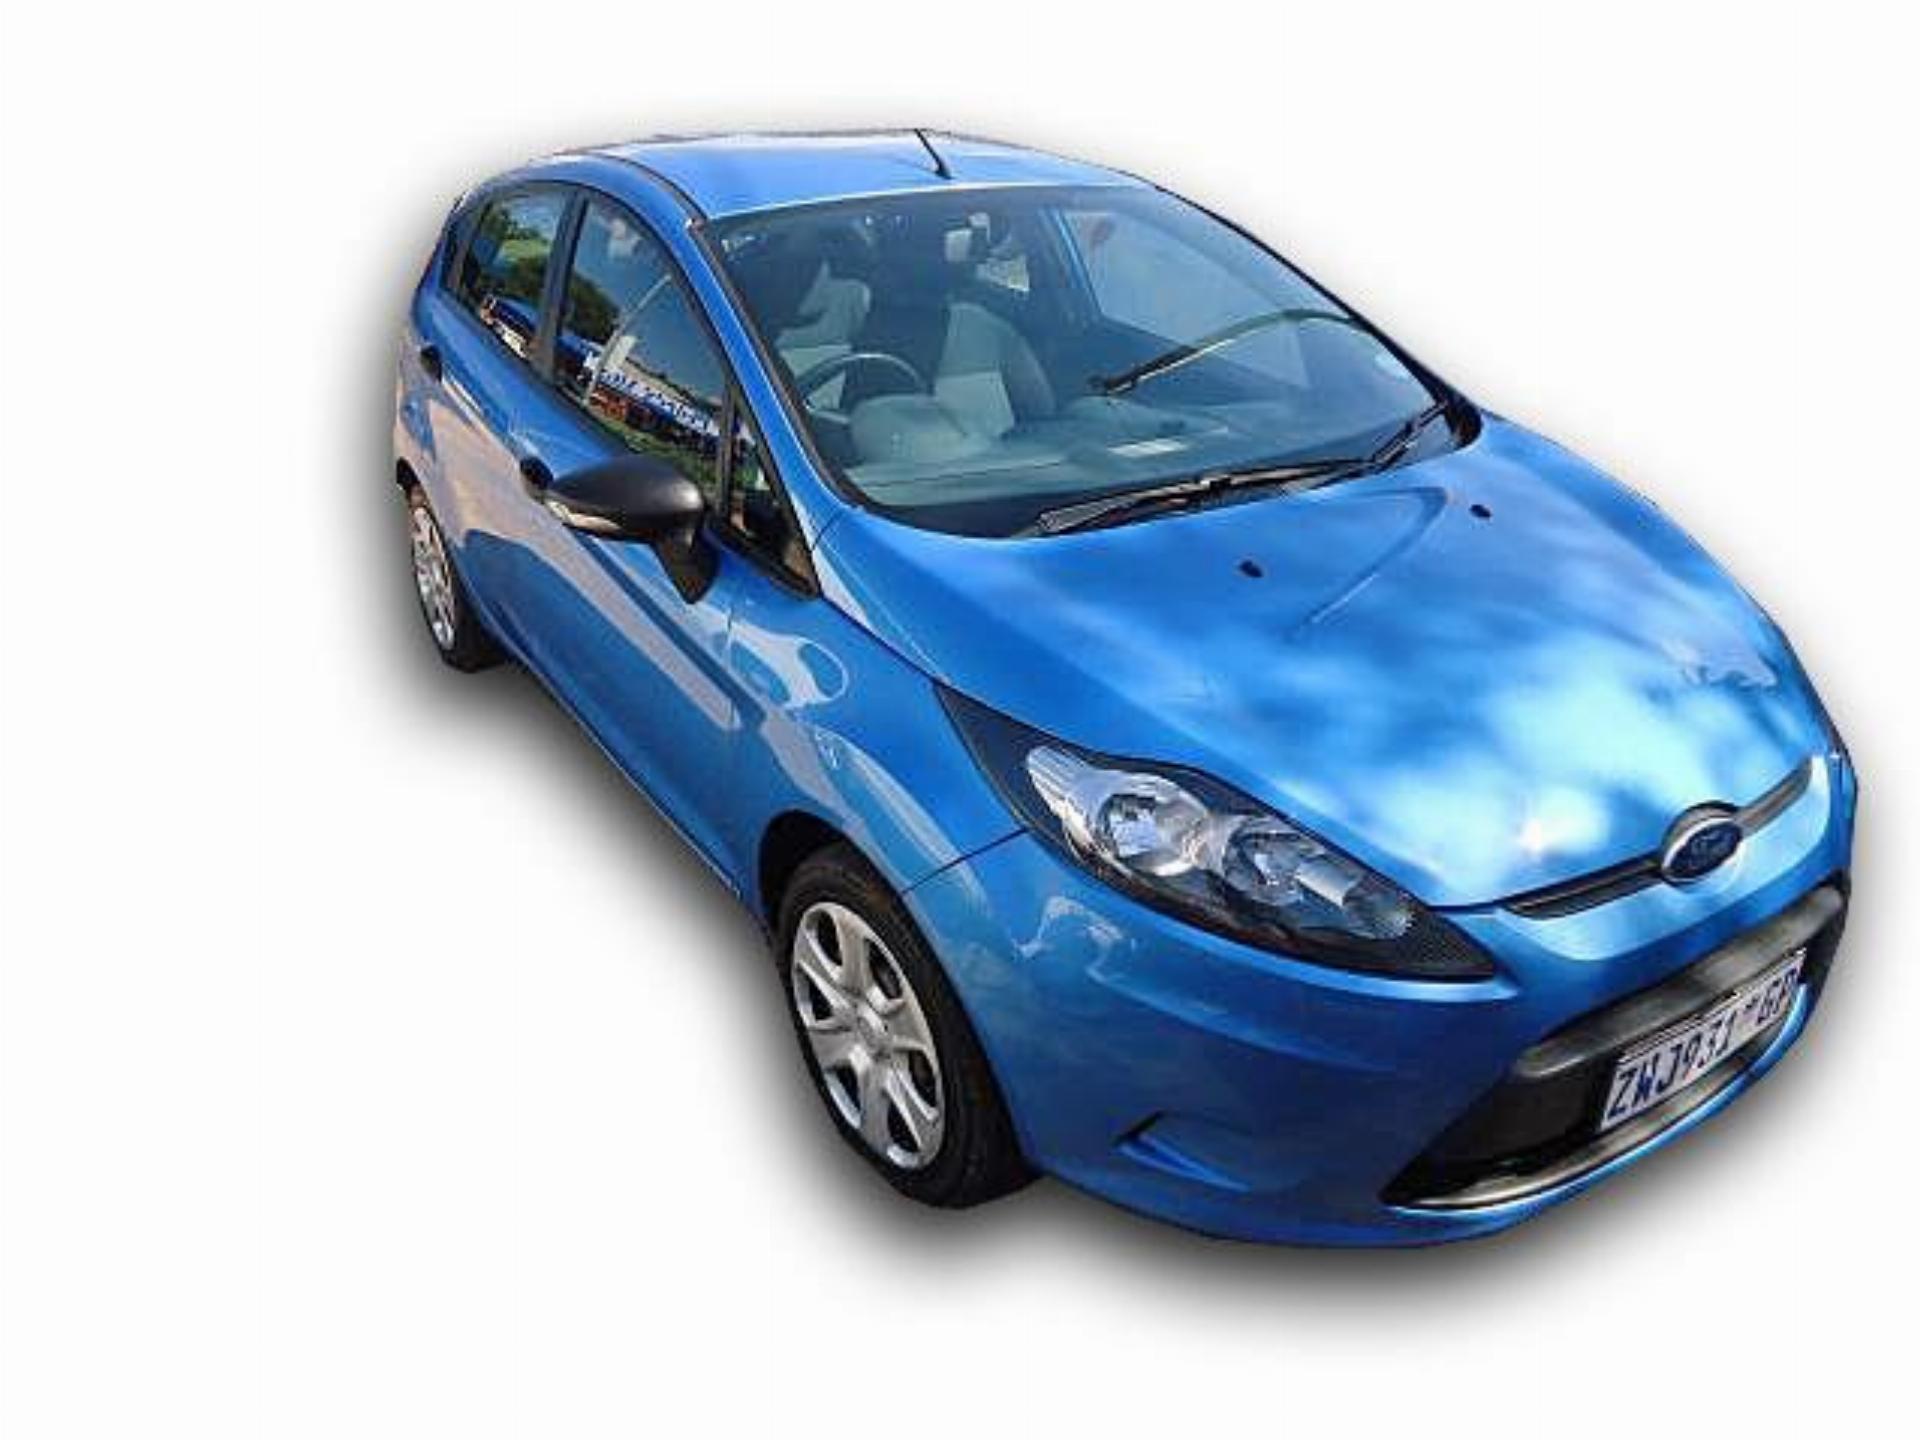 Ford Fiesta 1.4 Ambiente 5 DR